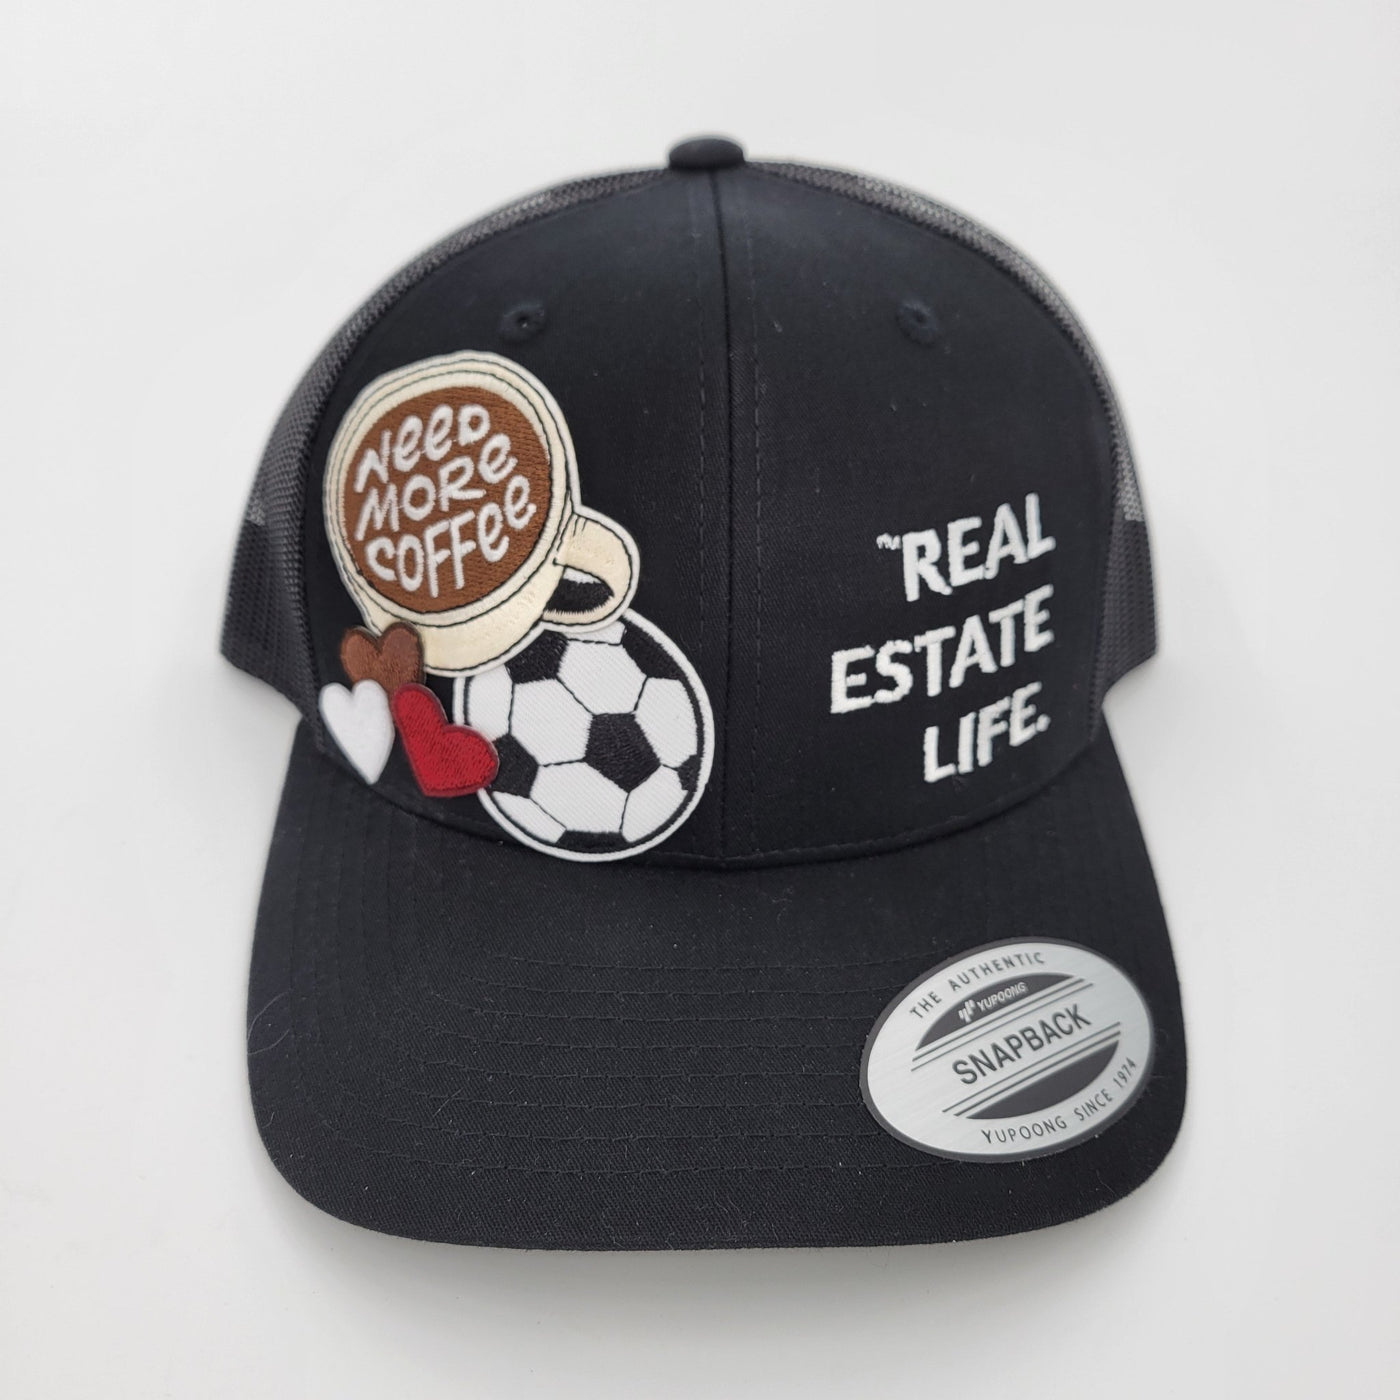 Patch Trucker Hat - Real Estate Life.™ - Need More Coffee - Soccer Ball - All Things Real Estate